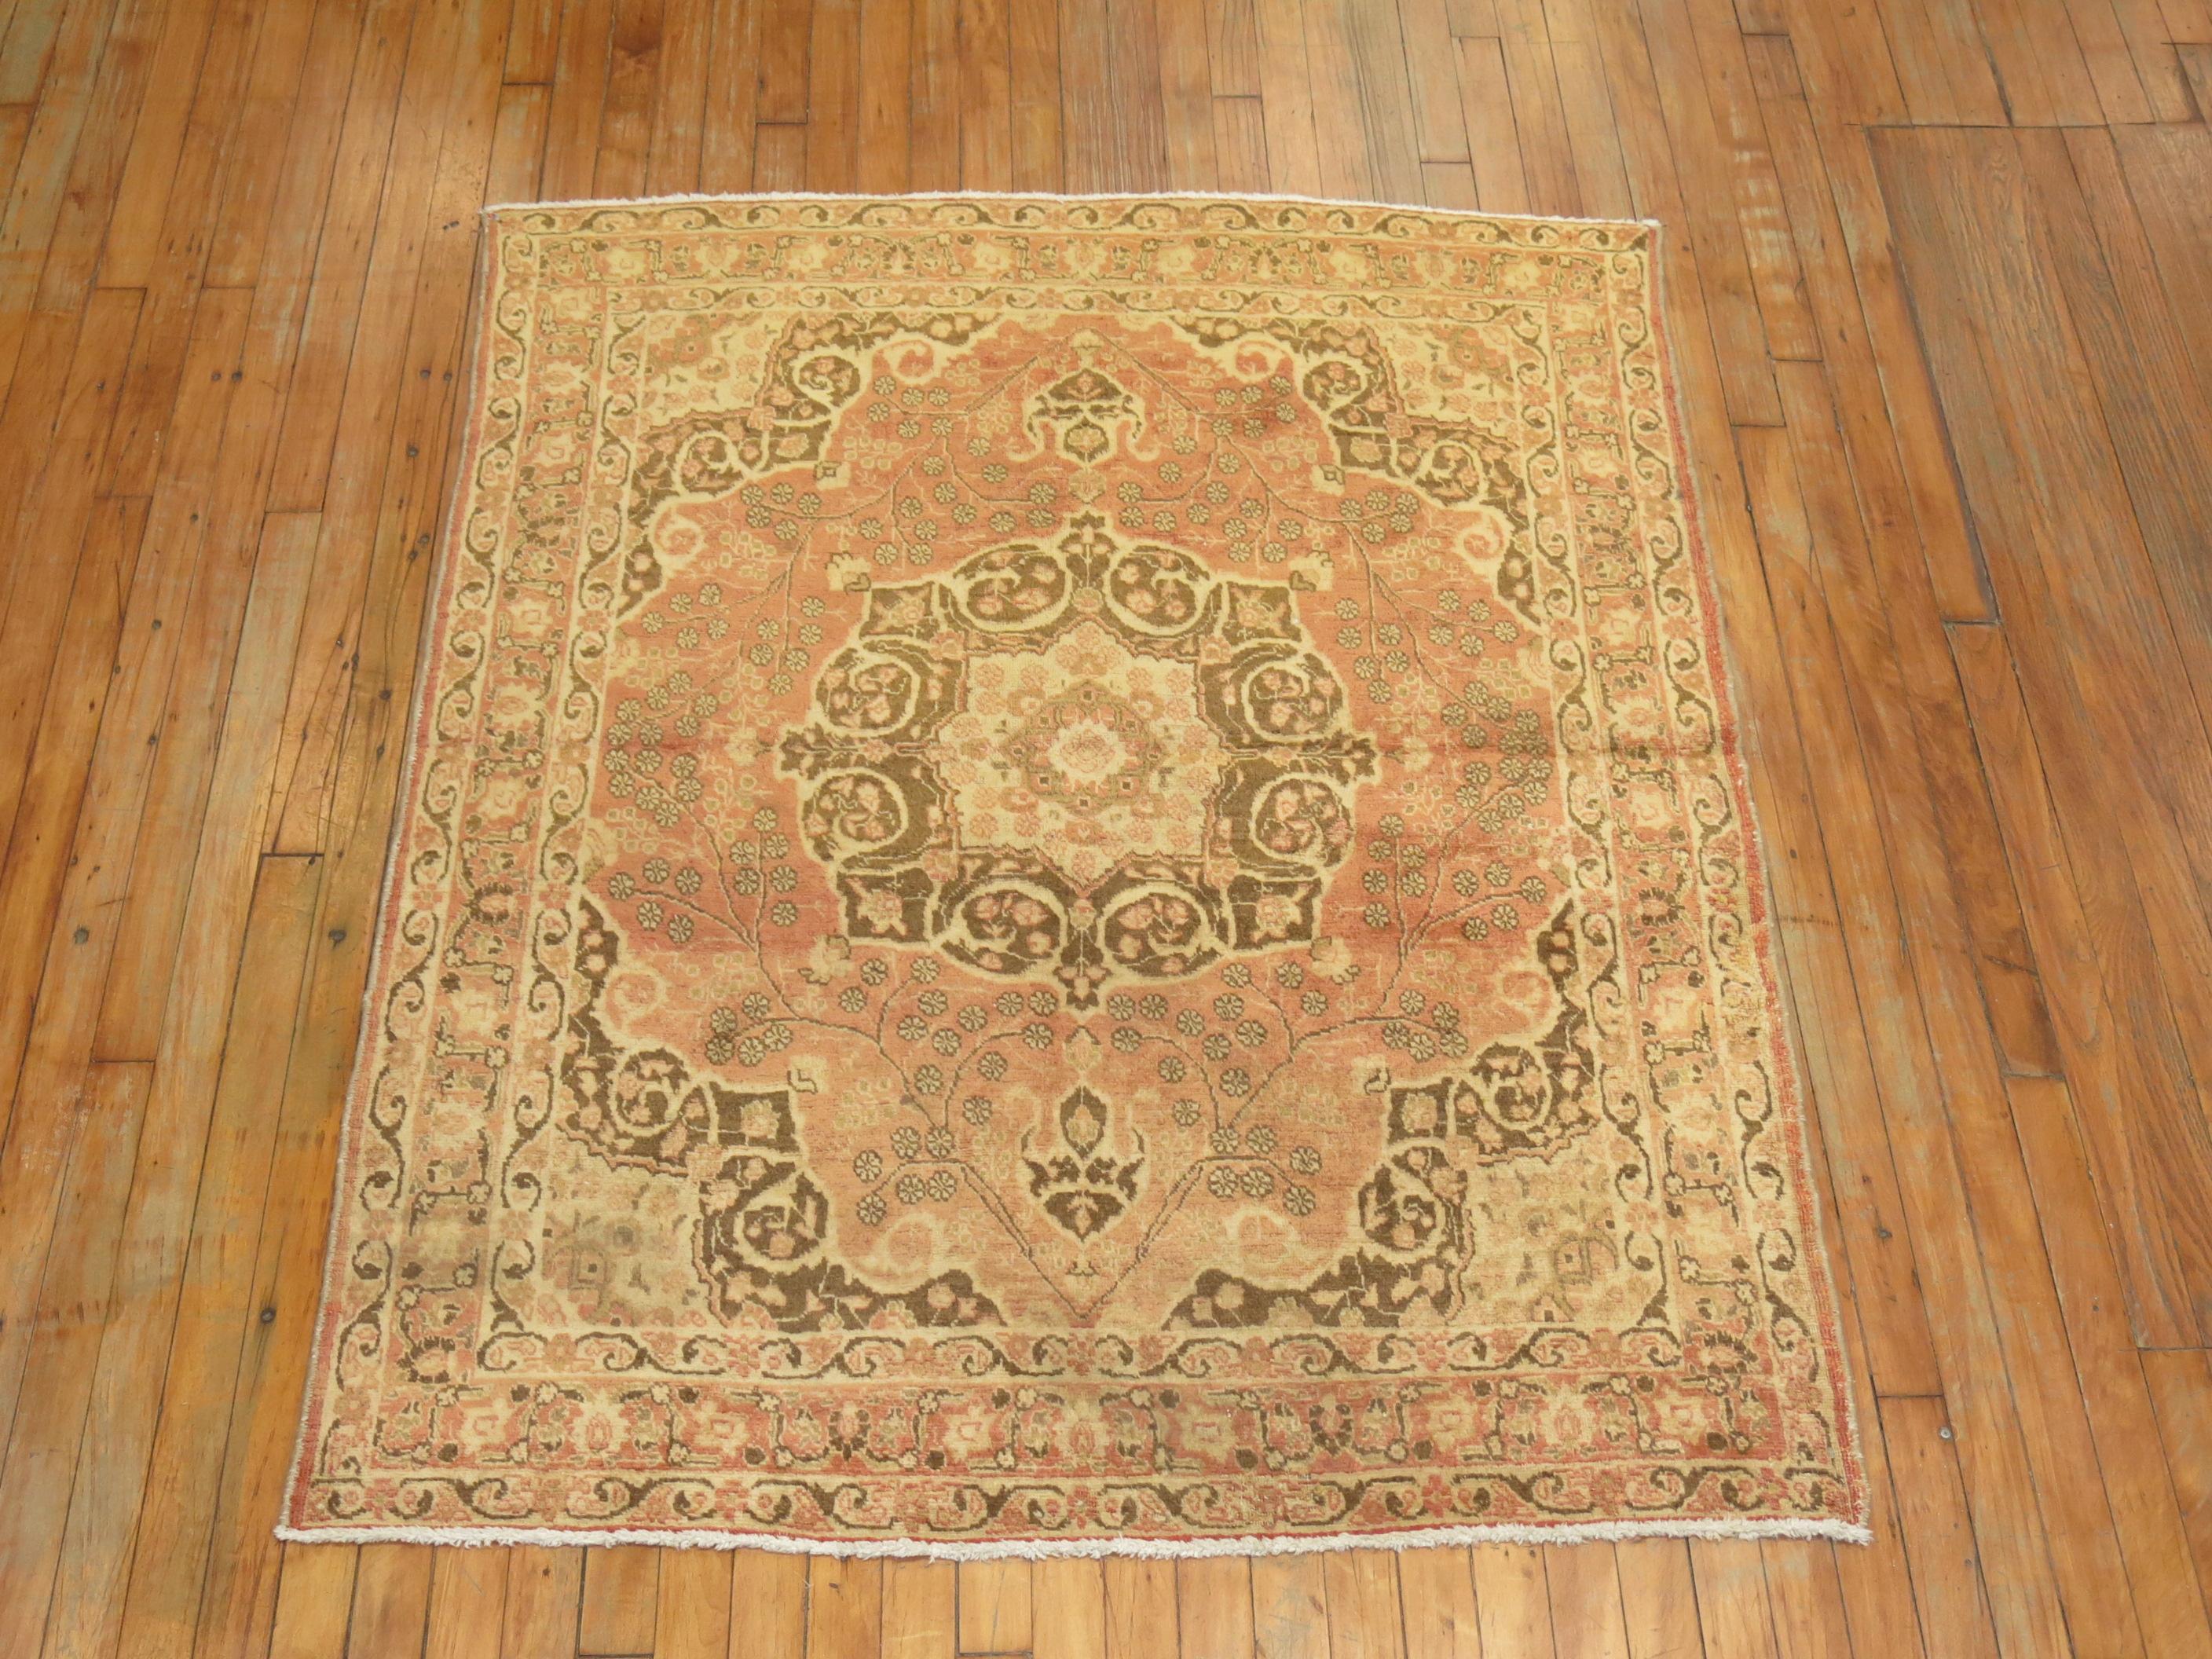 An authentic one of a kind Antique Persian Tabriz rug featuring Classic medallion and border in brown and salmon.